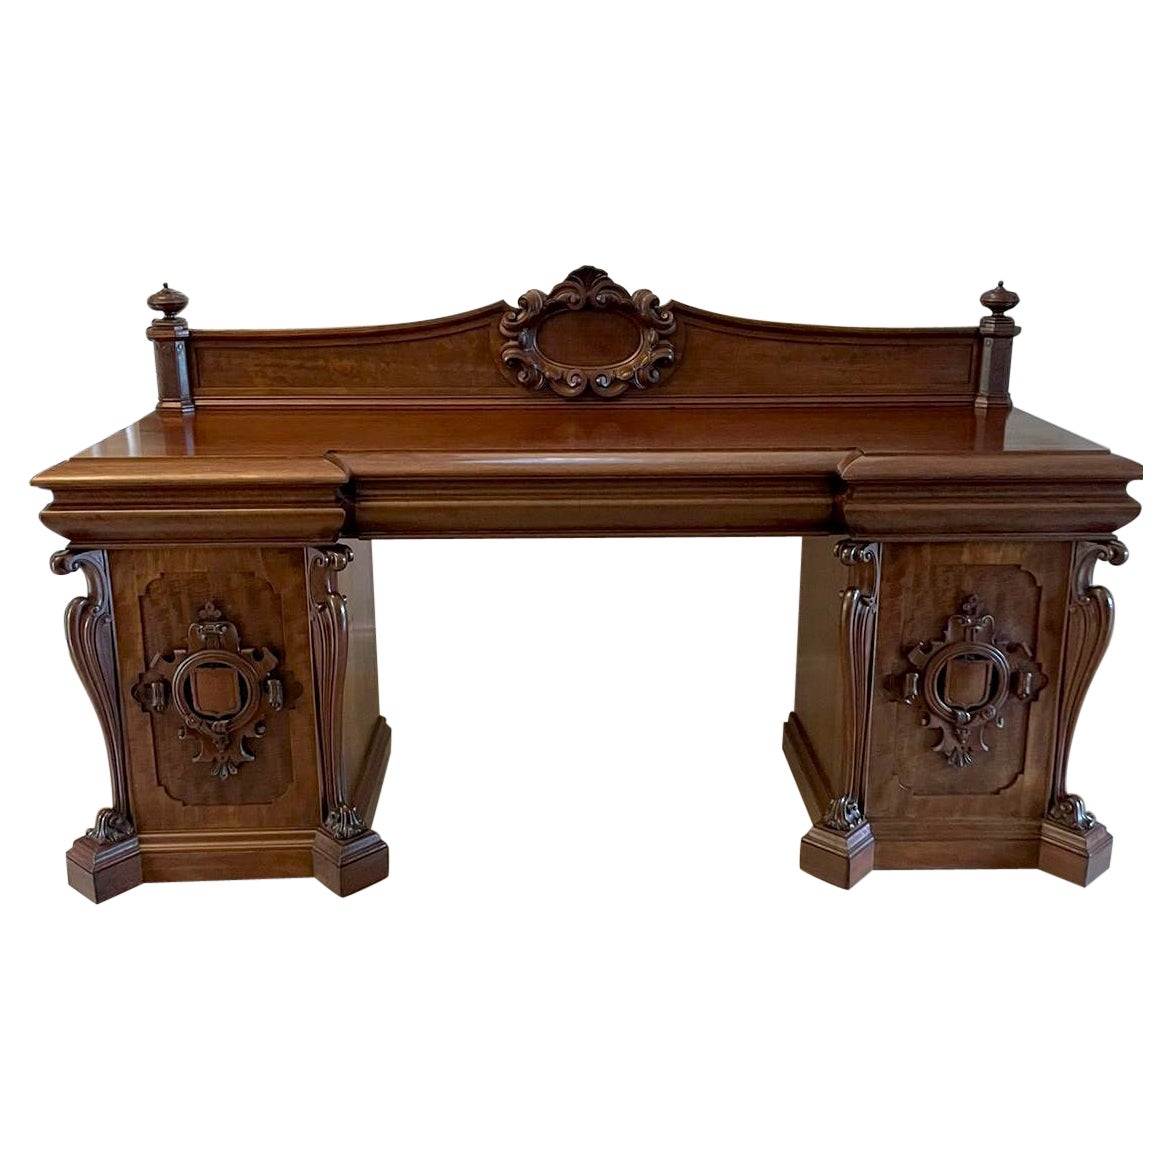 Large Magnificent Antique William IV Carved Mahogany Sideboard